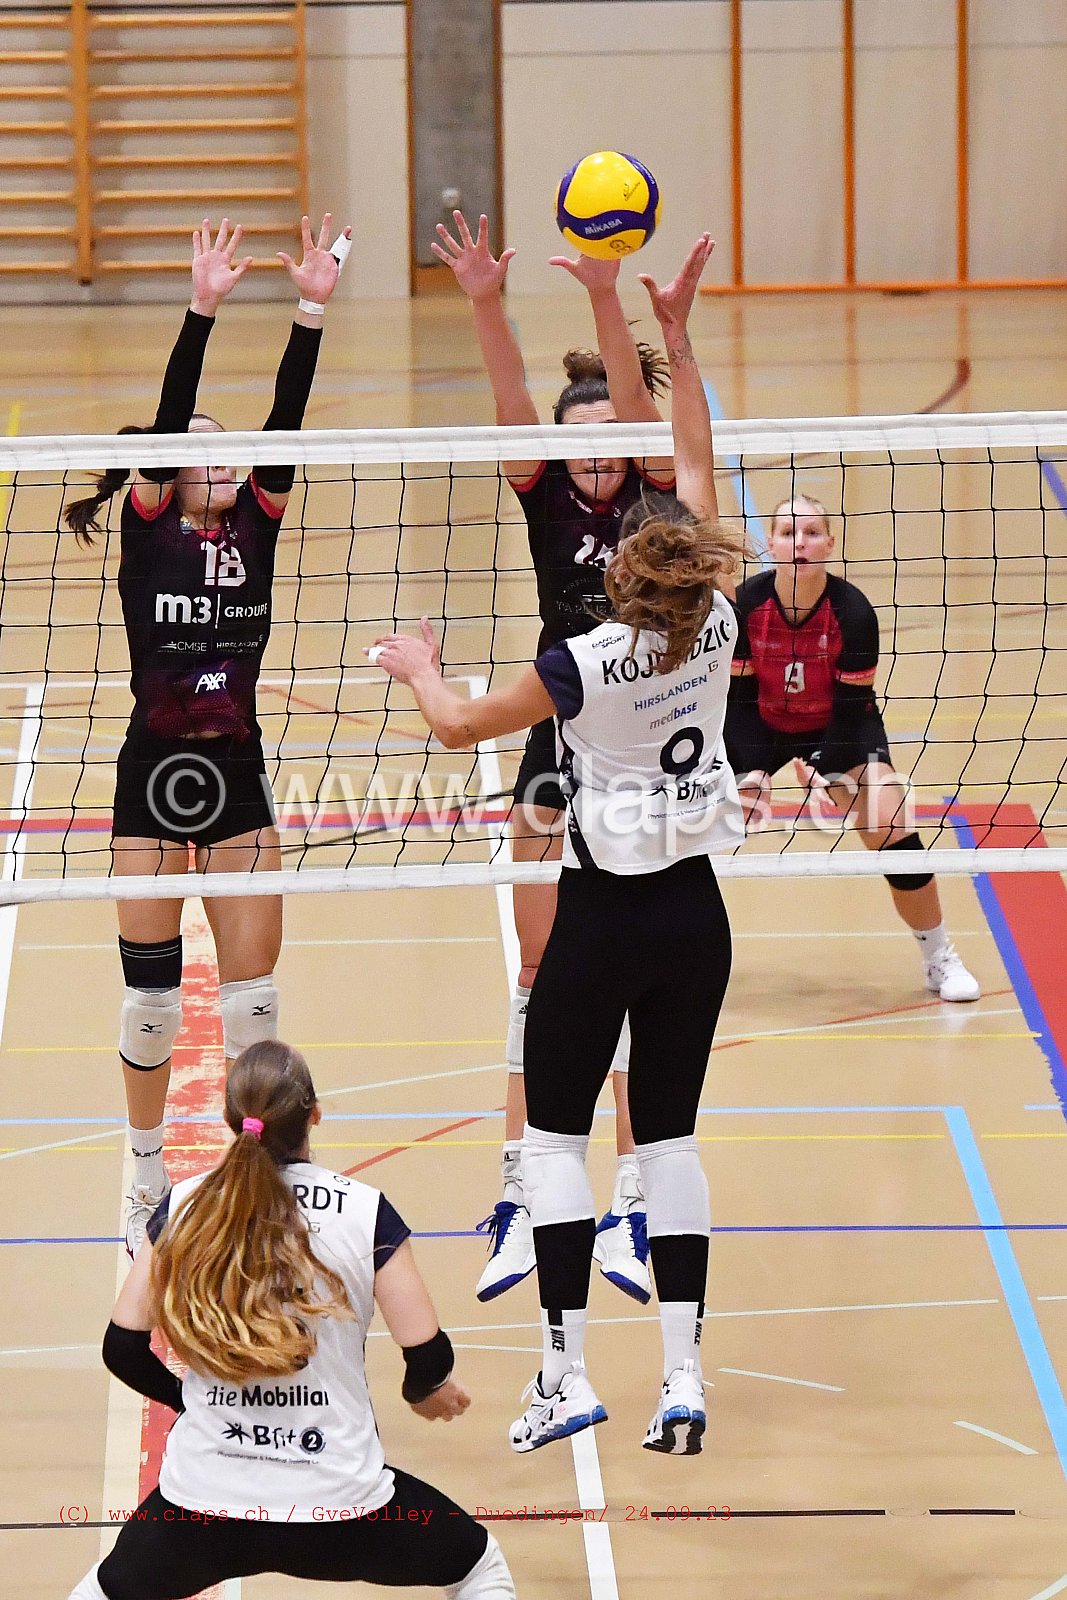 20230924 GveVolley - Duedingen Amical